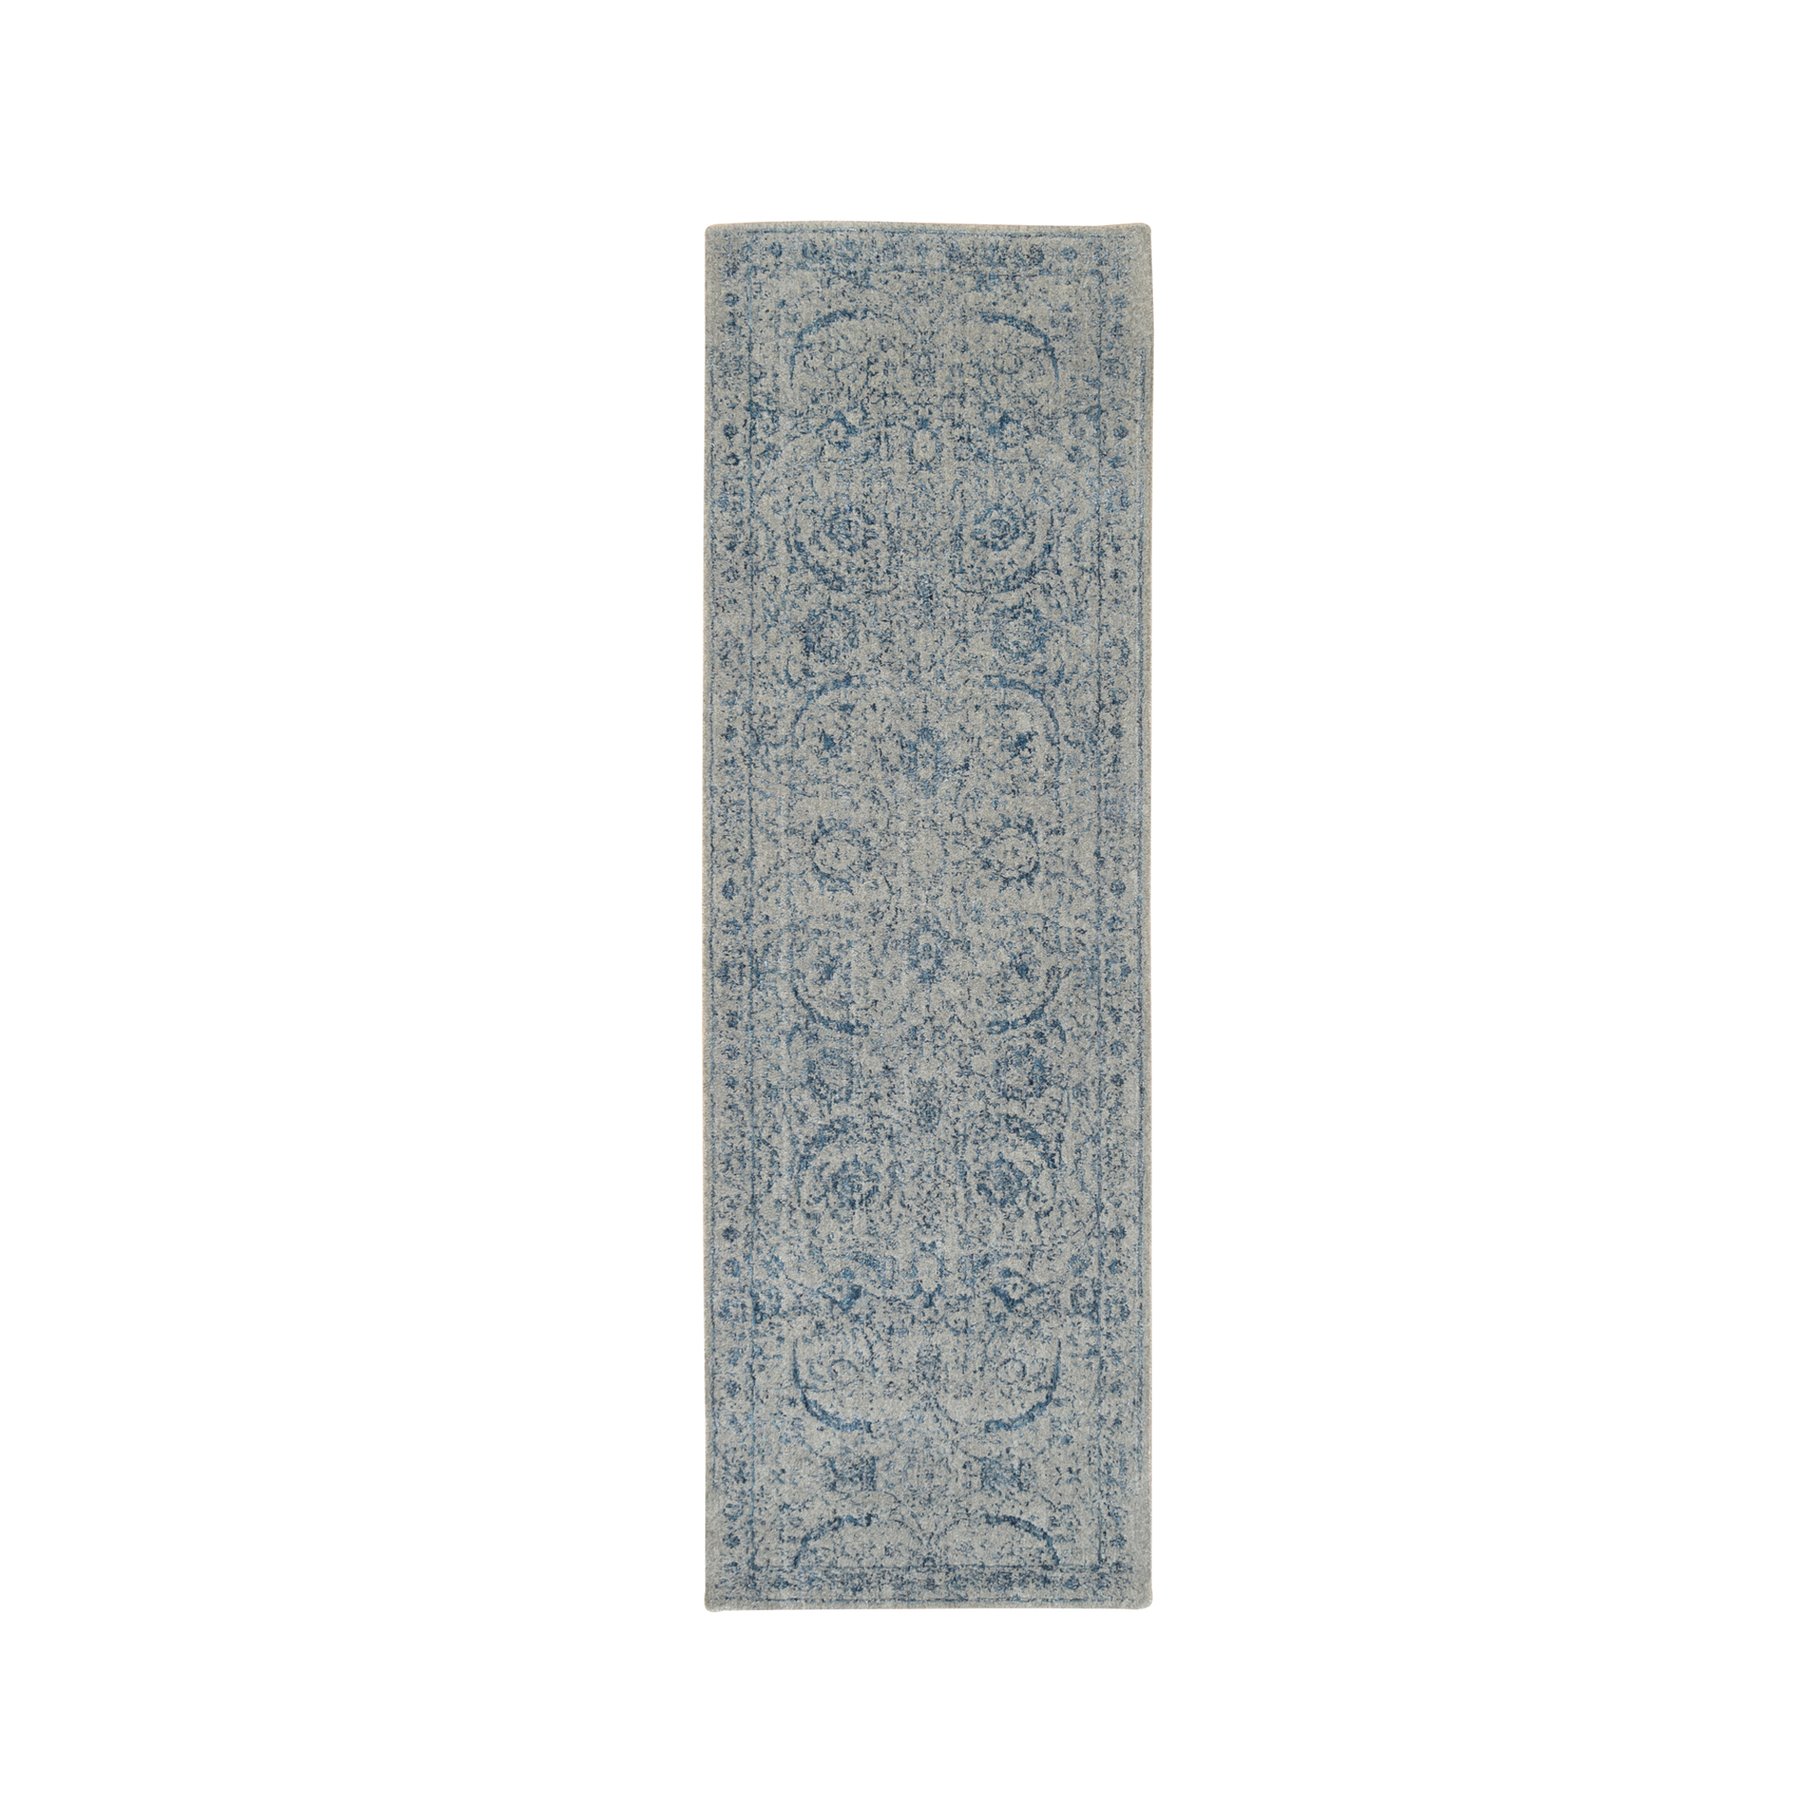 Transitional-Hand-Loomed-Rug-317570